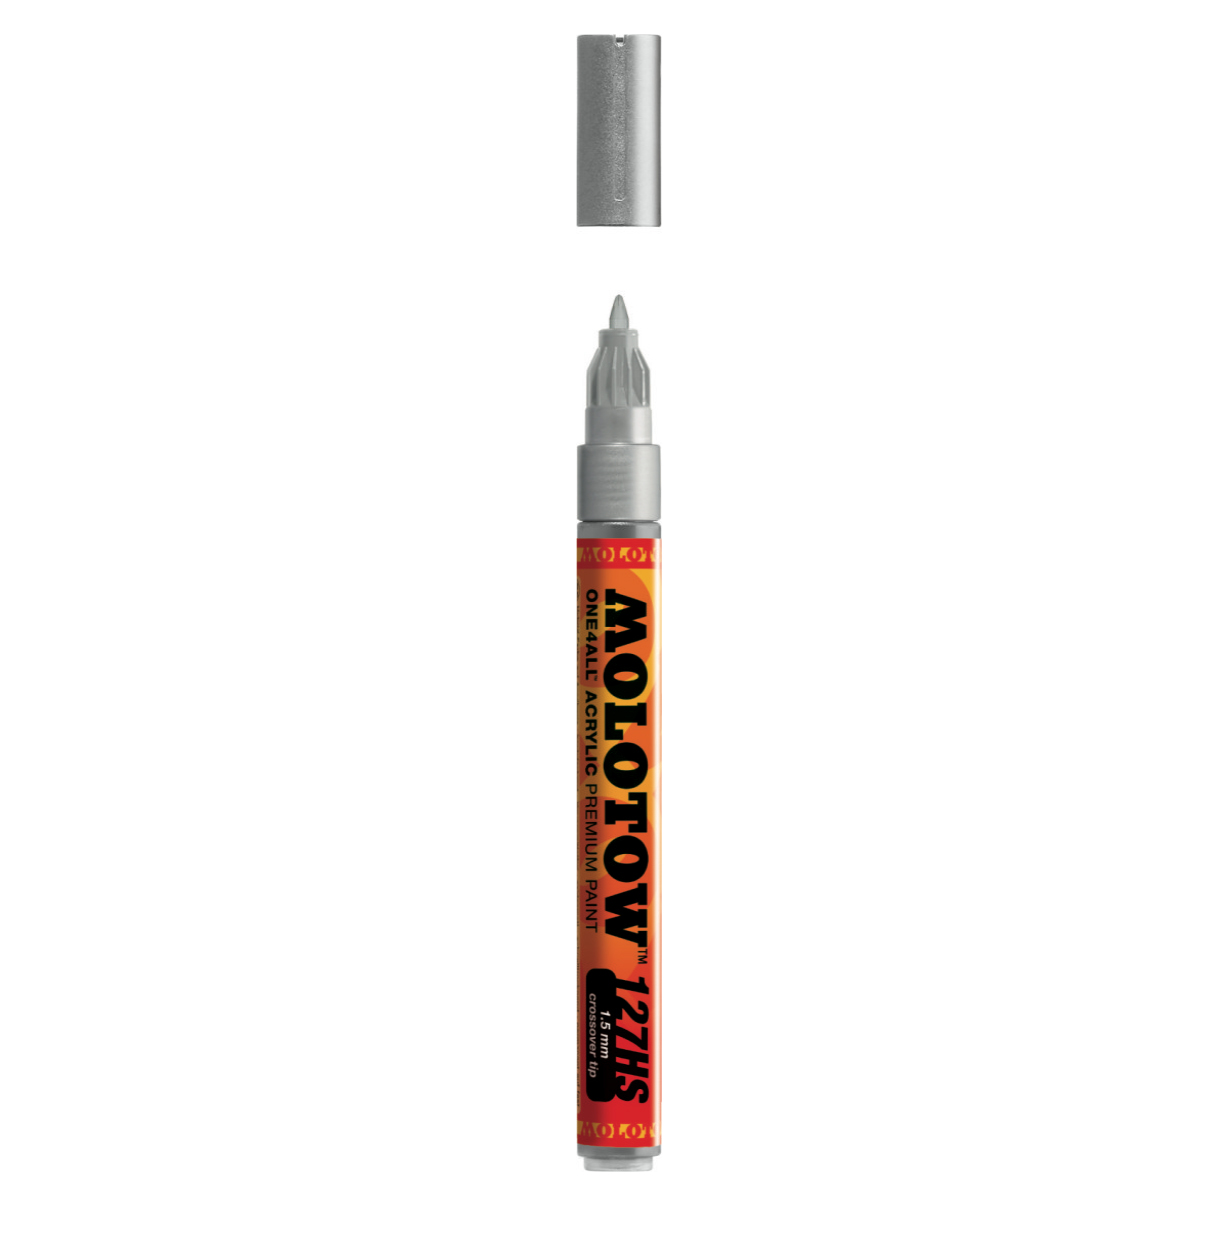 Molotow Co Tip 1.5Mm Metal. Silver Paint Mrkr